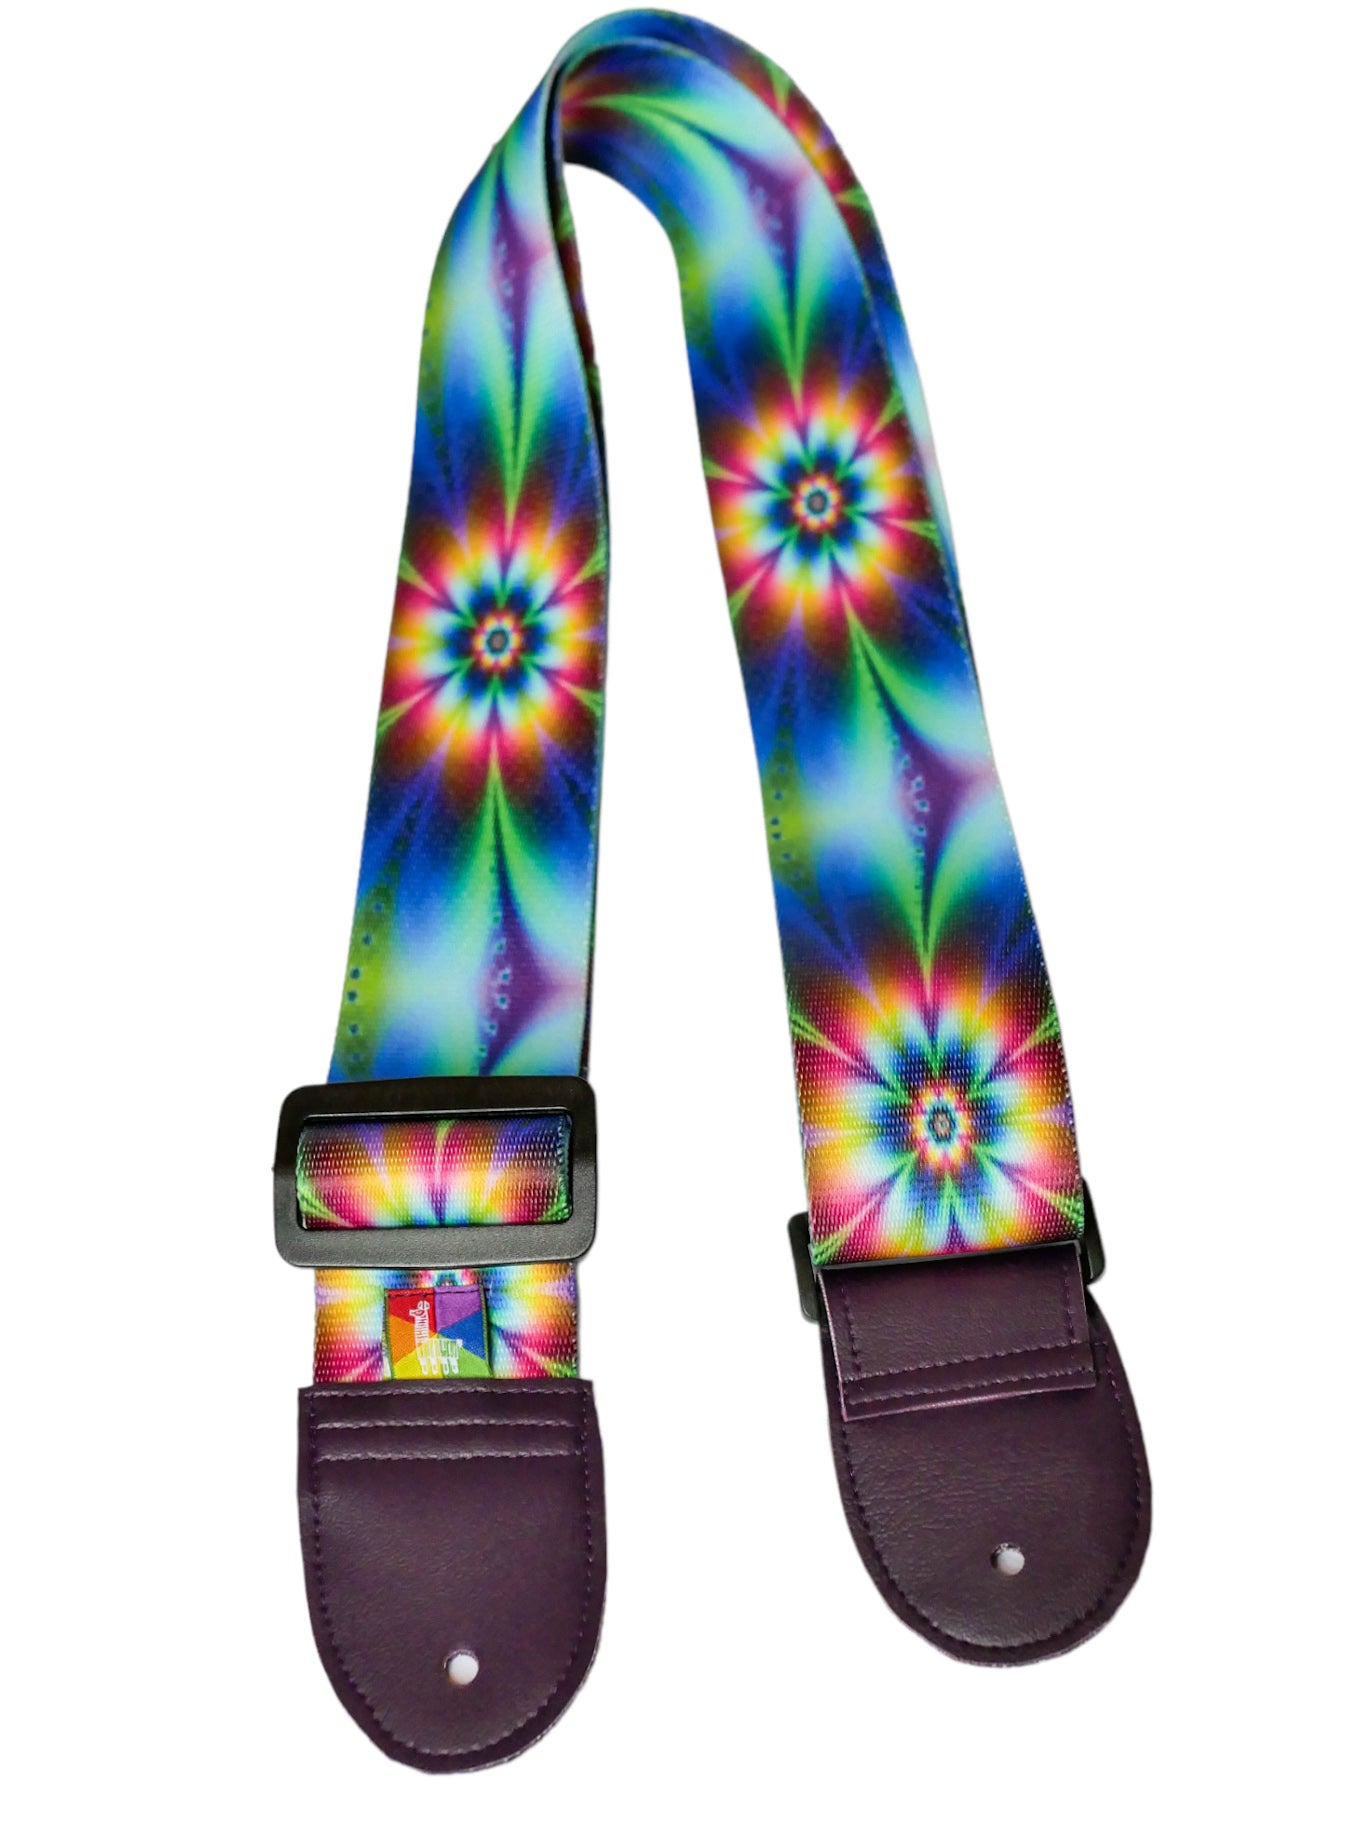 READY TO SHIP Guitar Straps - Free US Shipping